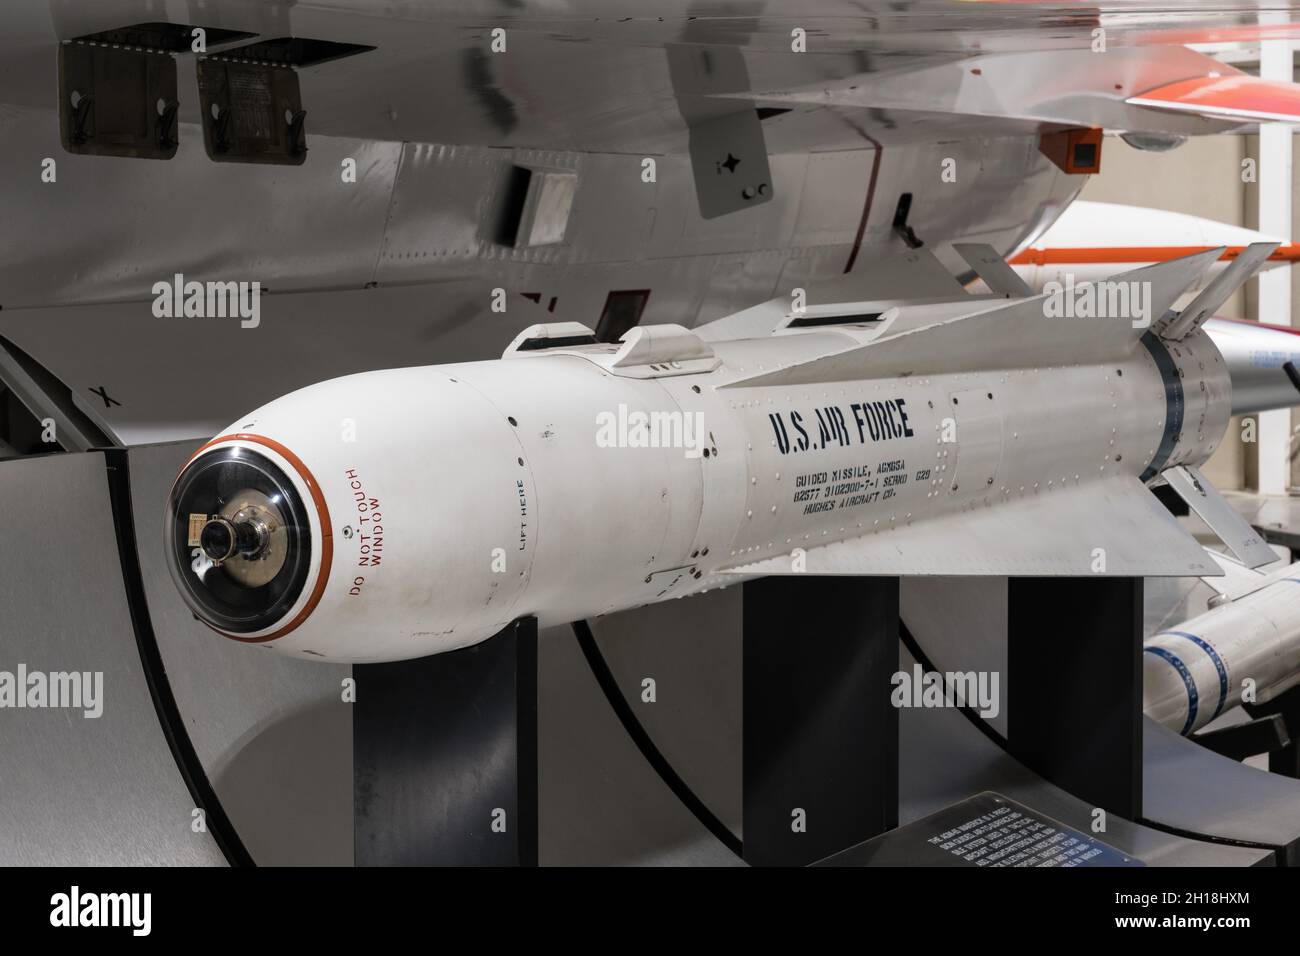 A Hughes AGM-65 Maverick precision guided air-to-surface missile in the Hill Aerospace Museum. Stock Photo